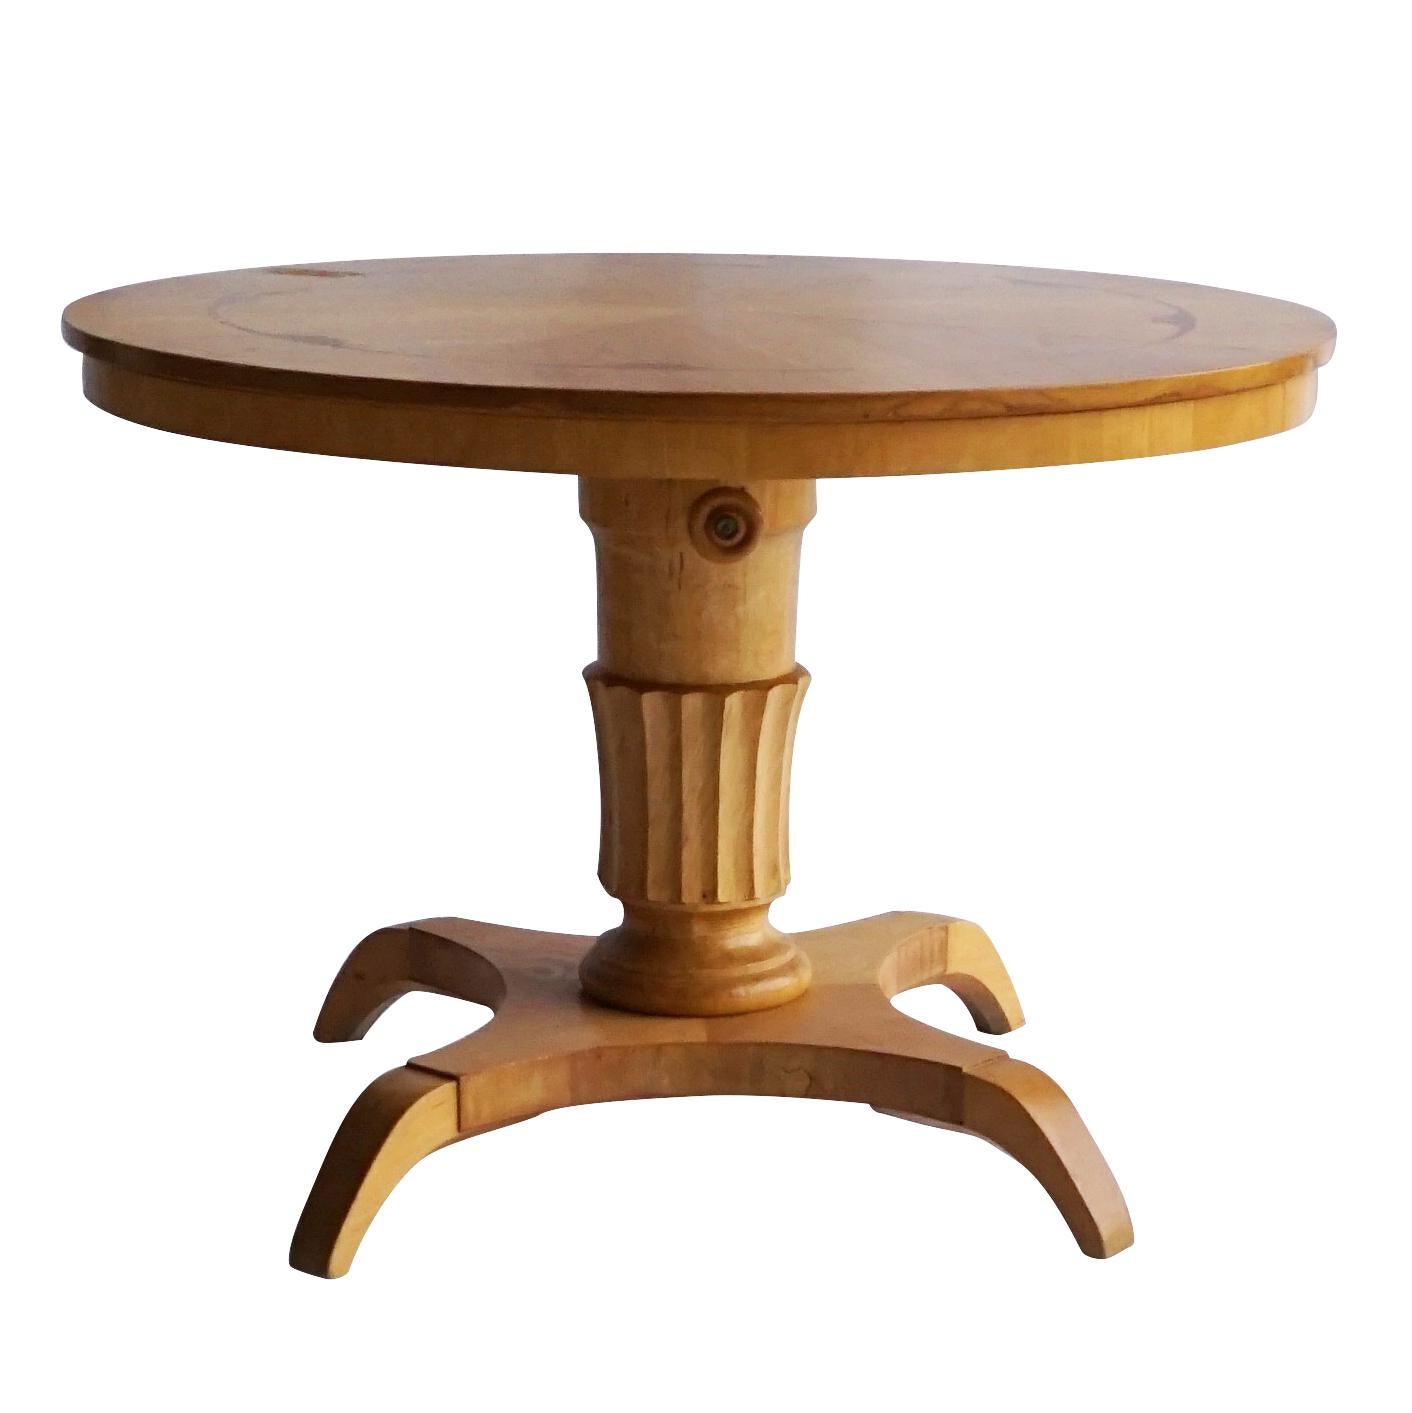 A vintage Mid-Century Modern Swedish round pedestal table or coffee table made of hand carved Birchwood with a nicely carved baluster column, standing on four curved legs, in good condition. Wear consistent with age and use, circa 1940, Stockholm,